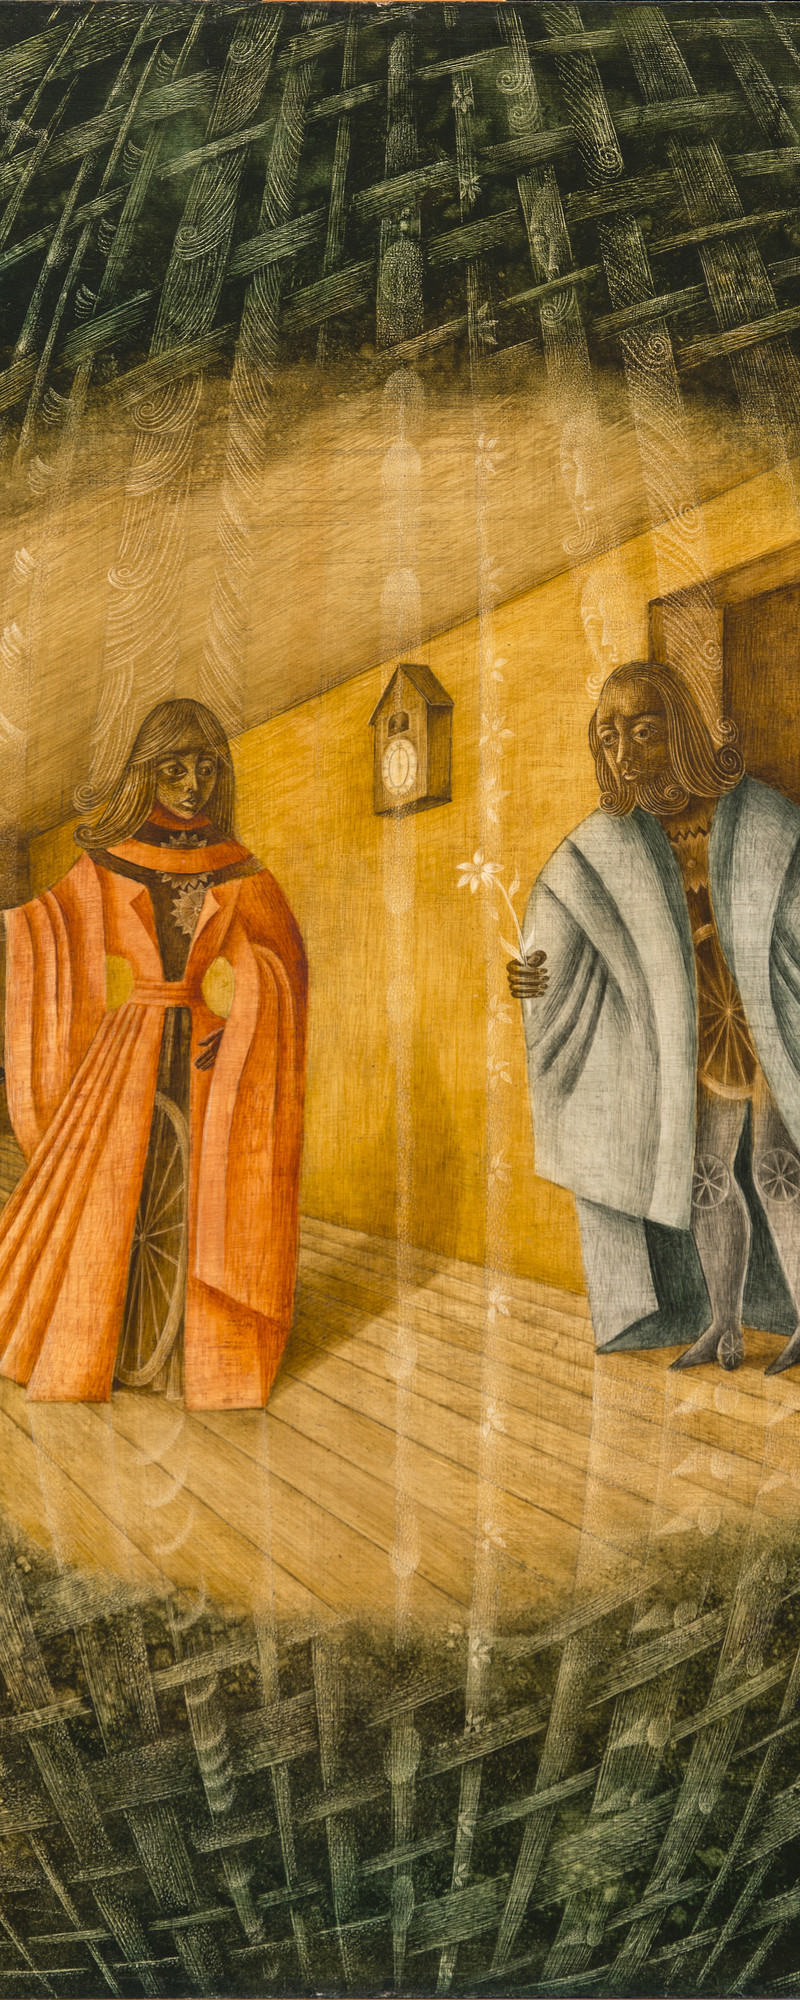 Green-tinted woven wood covers the corners and leads to the middle where a woman in an orange cloak made from various wooden objects such as a wagon wheel holds a candle and looks to her right at a man entering into the room from a door. The man is wearing a blue cloak and is also comprised of wooden objects. In his right hand, he holds a white flower. Behind them, a clock hangs on the wall, and in the left corner, a blackbird perches on a chair.